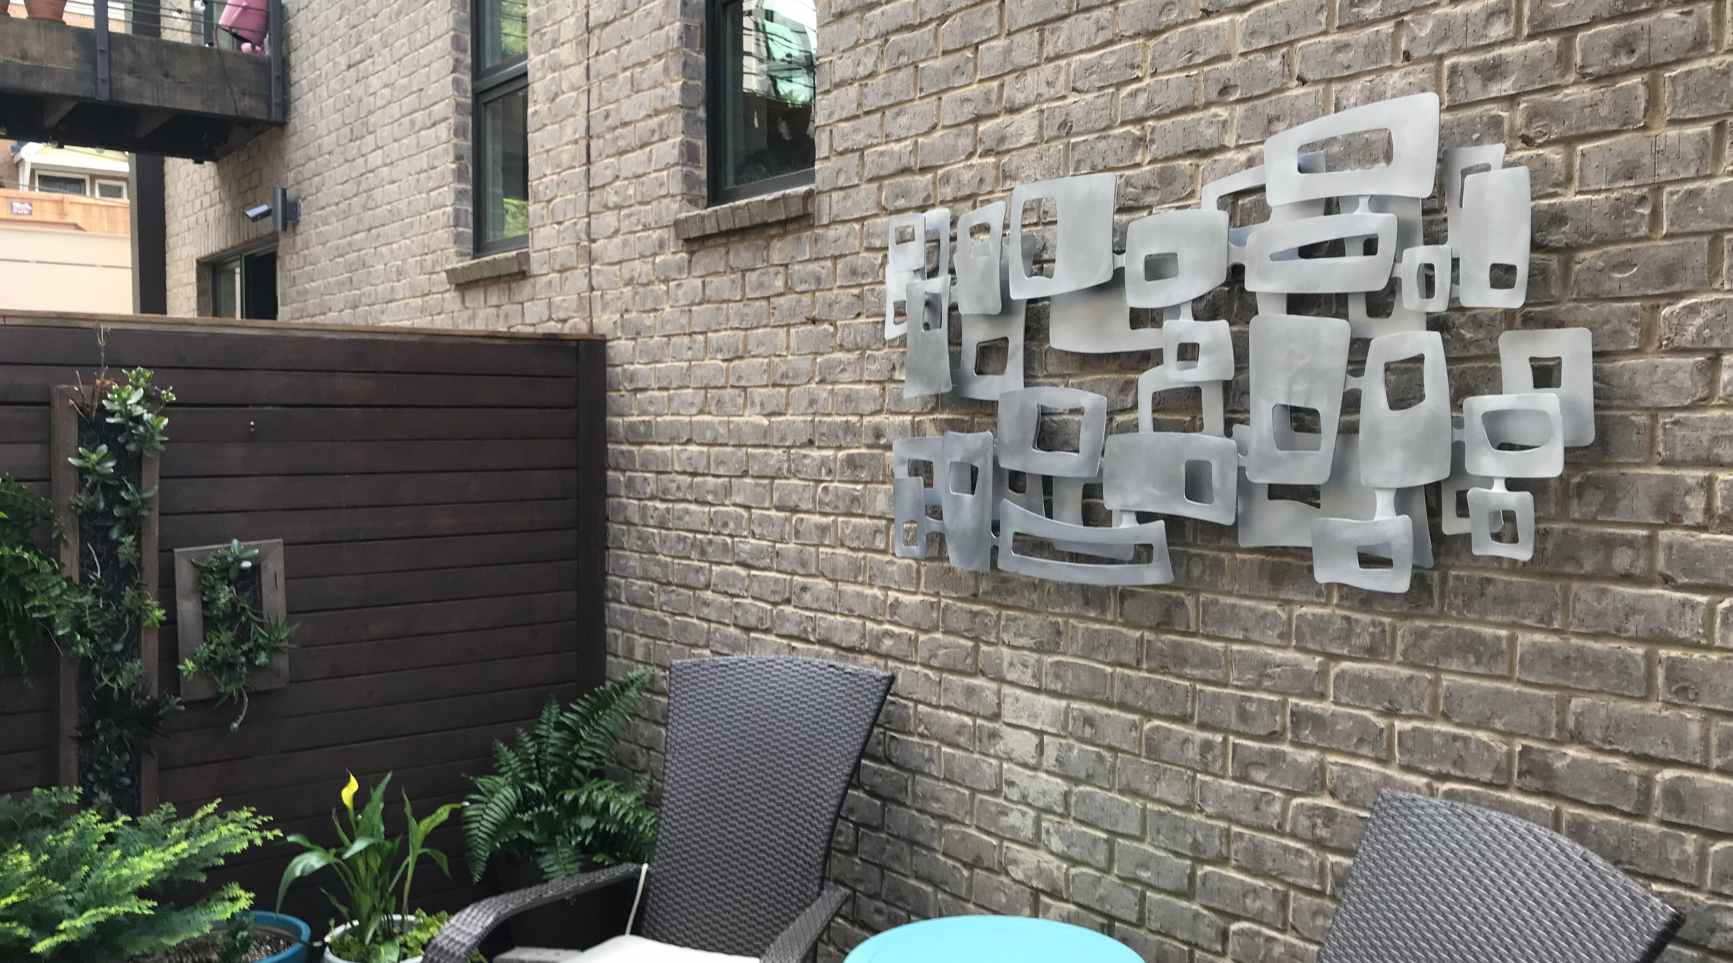 How To Decorate Brick Wall Outside